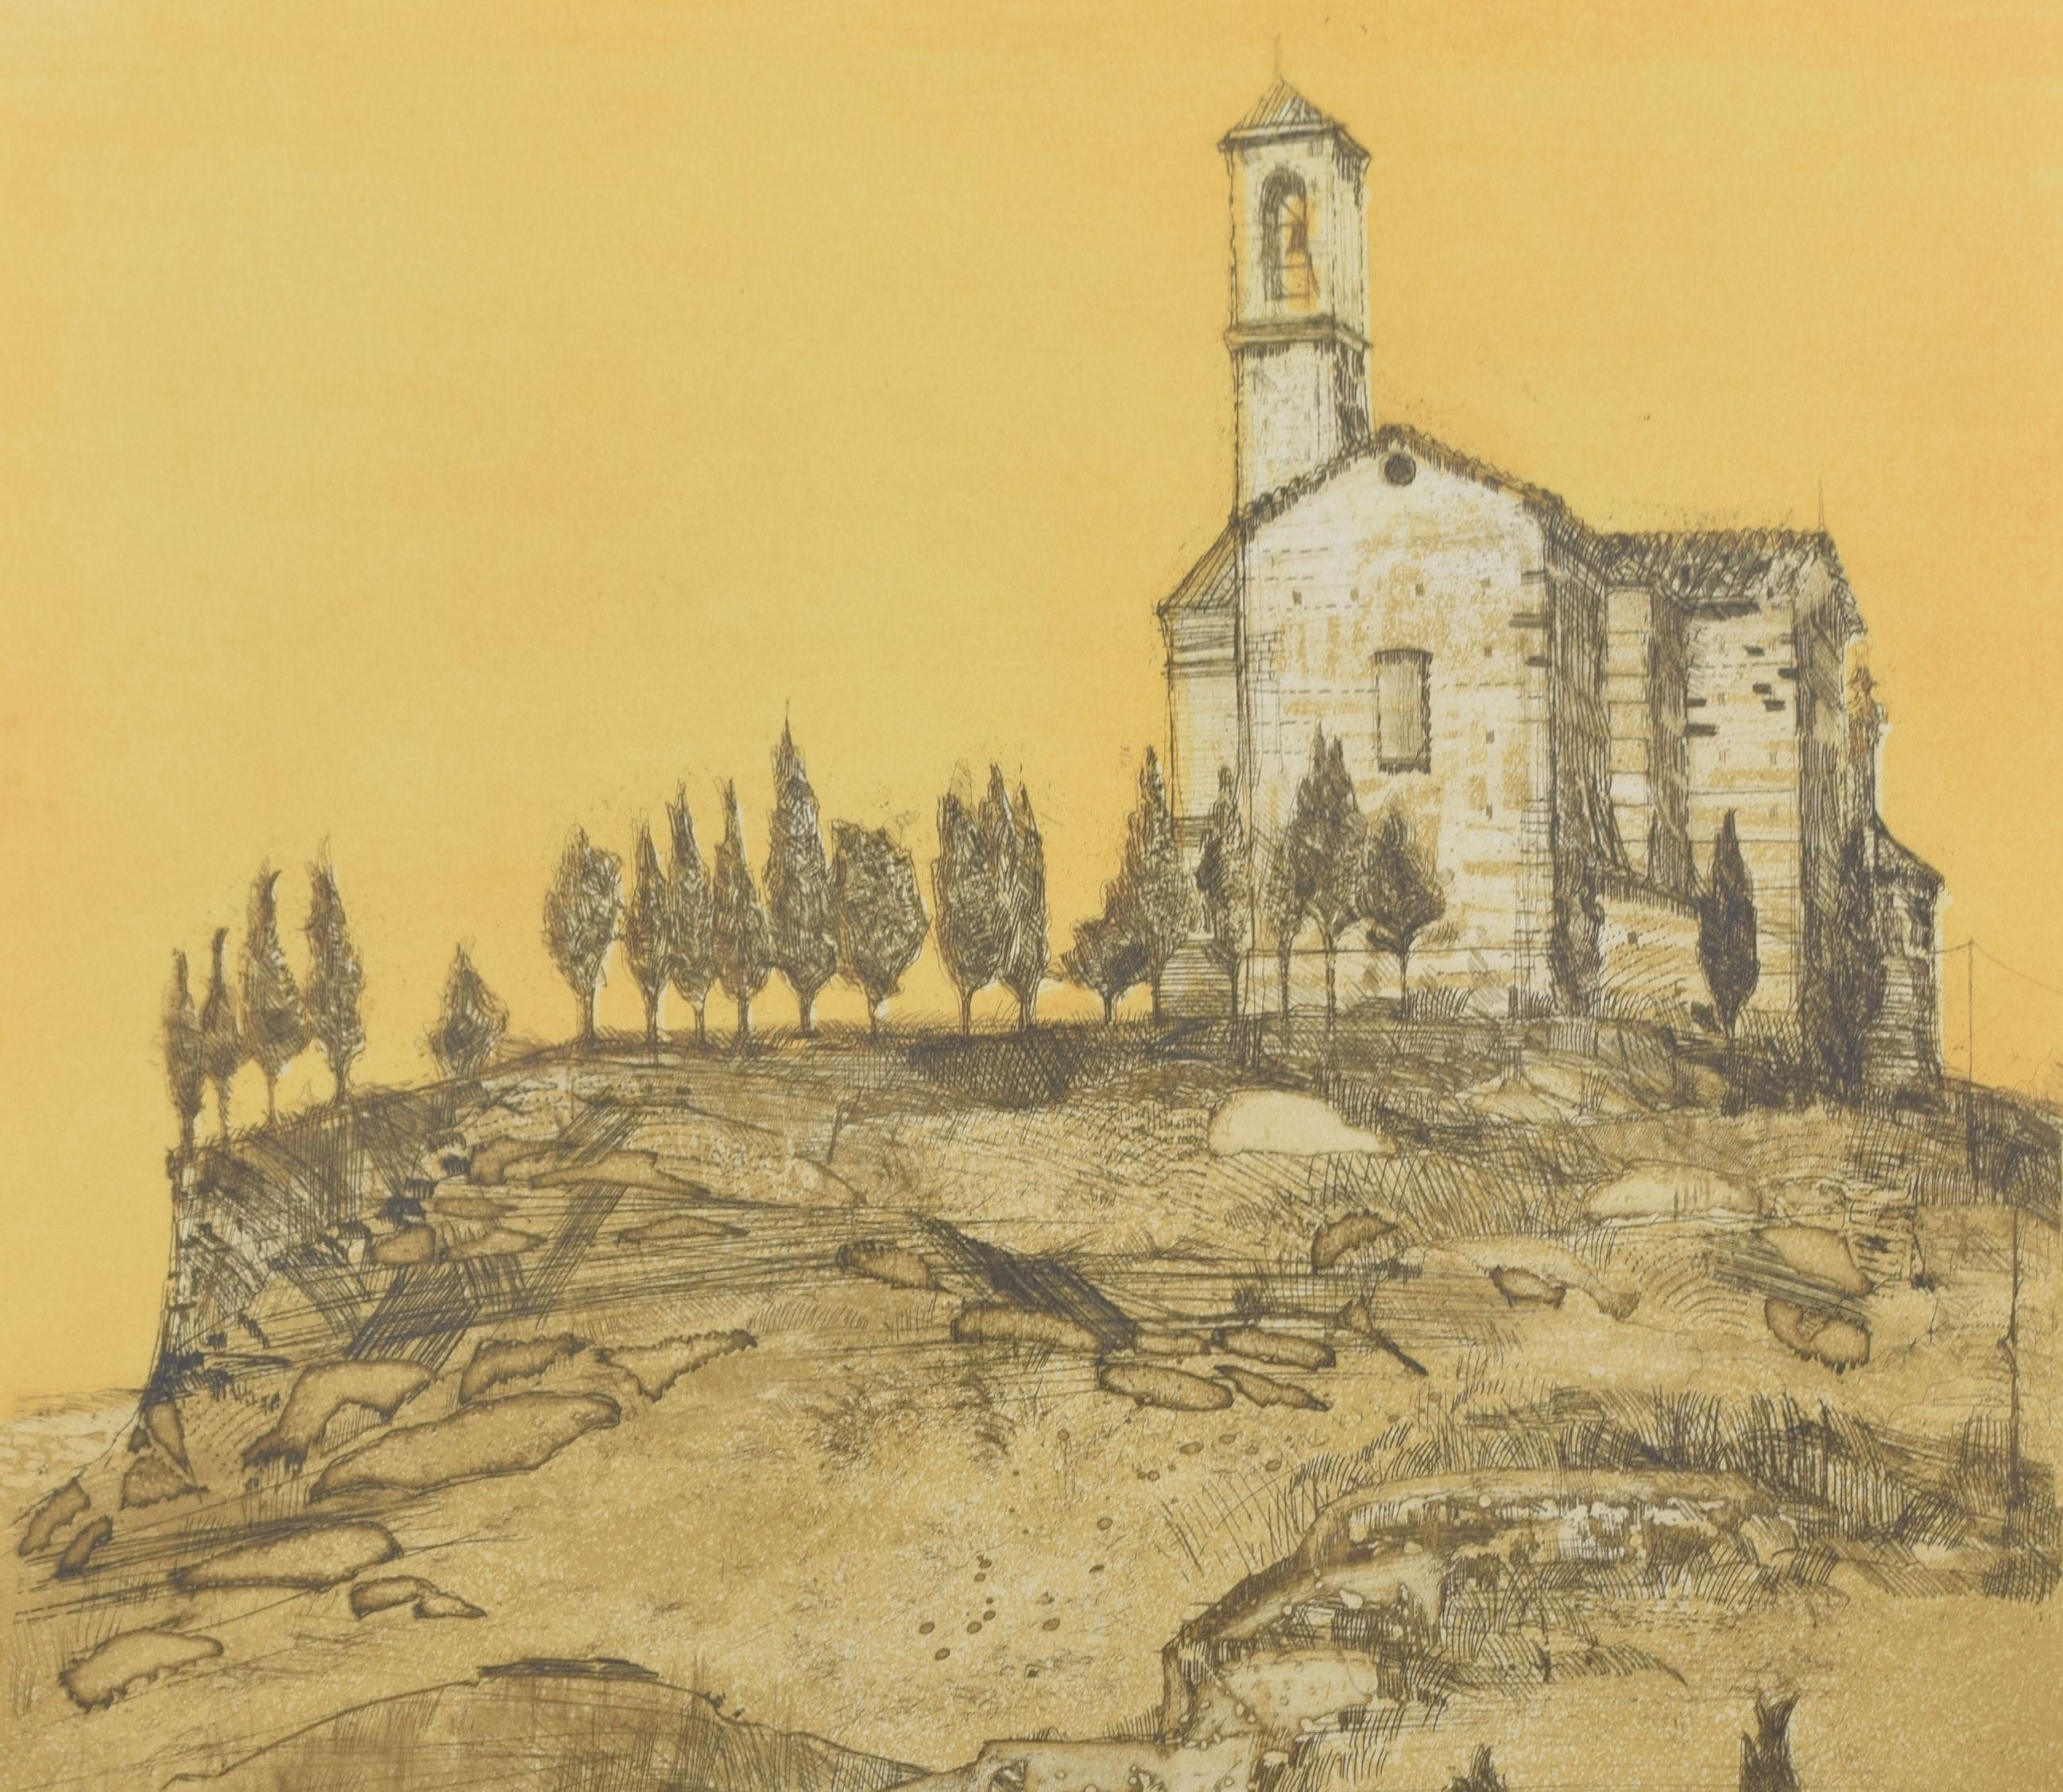 Volterra, Tuscany, Italy etching by Richard Beer 3